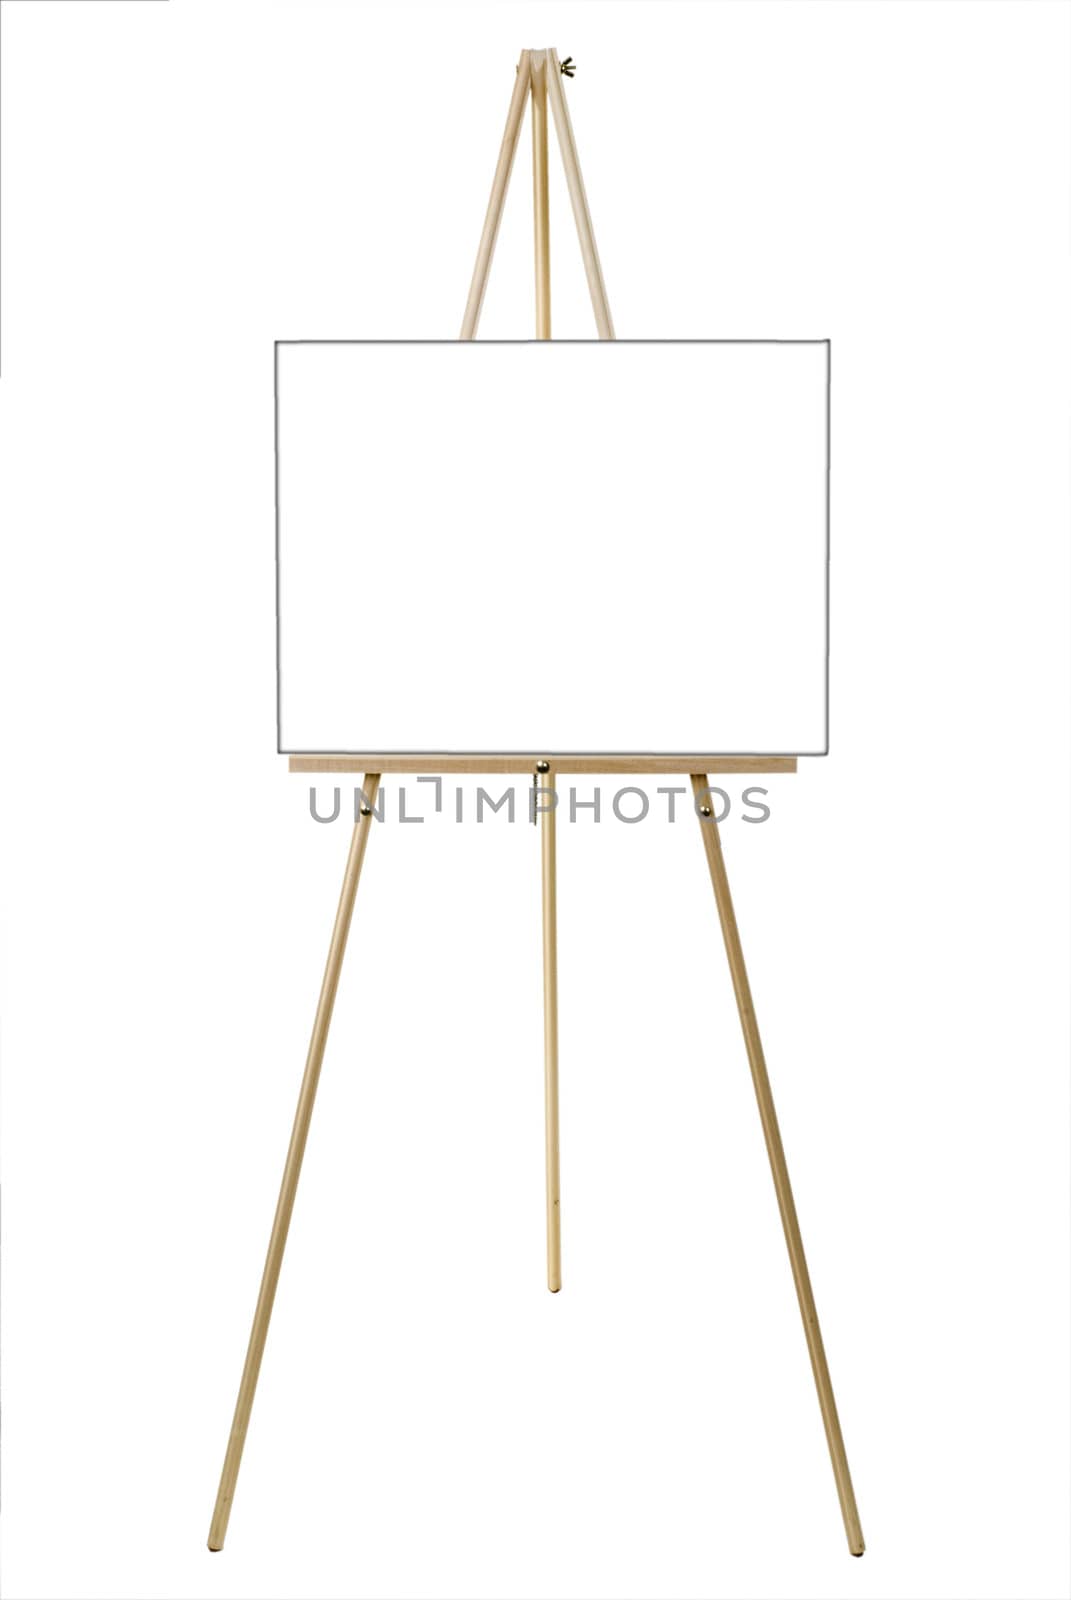 Blank canvas on an easel isolated on white with a clipping path.